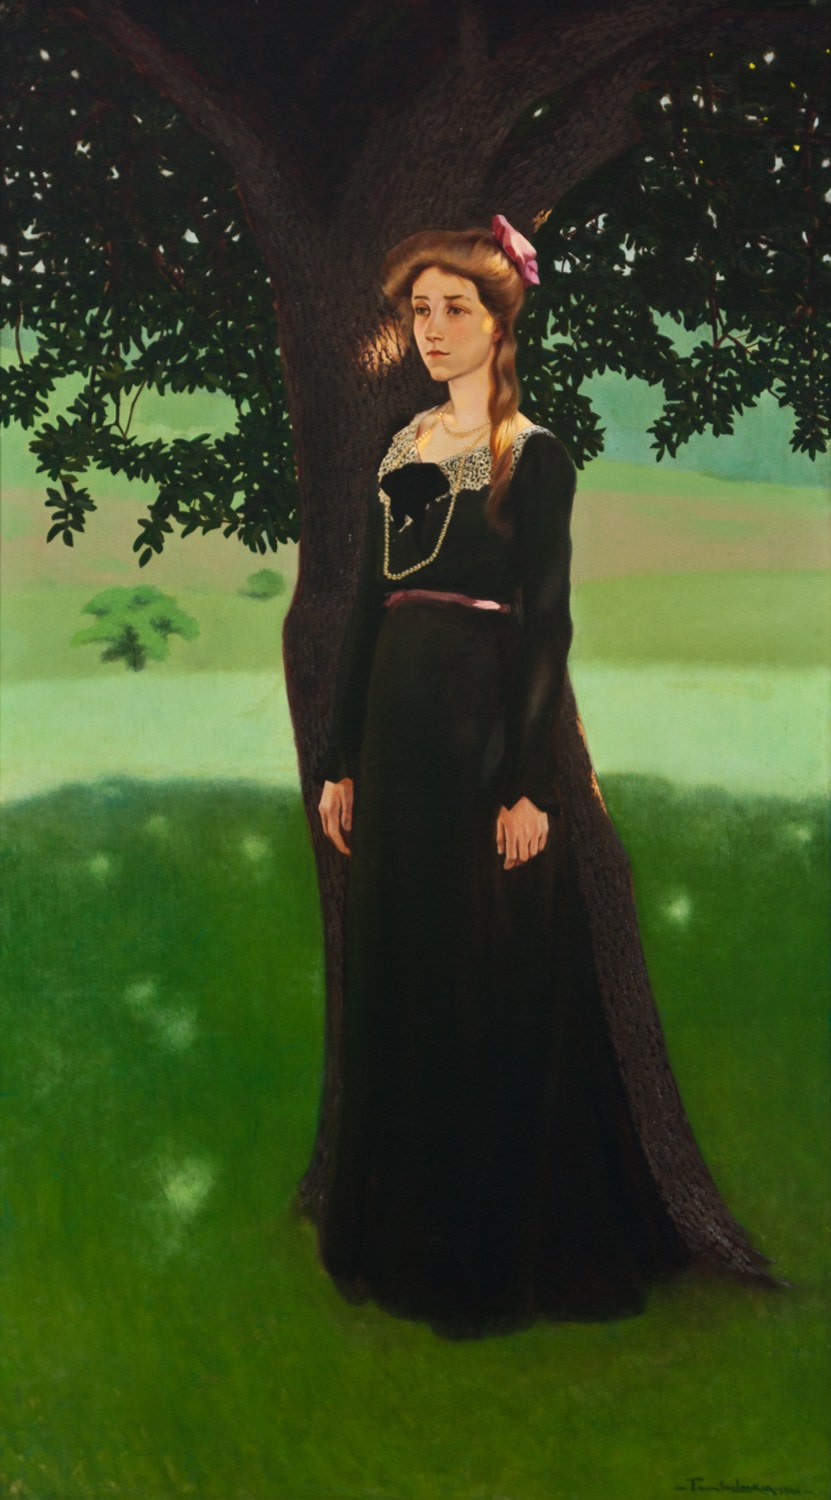 Portrait of a Woman by a Tree, about 1900